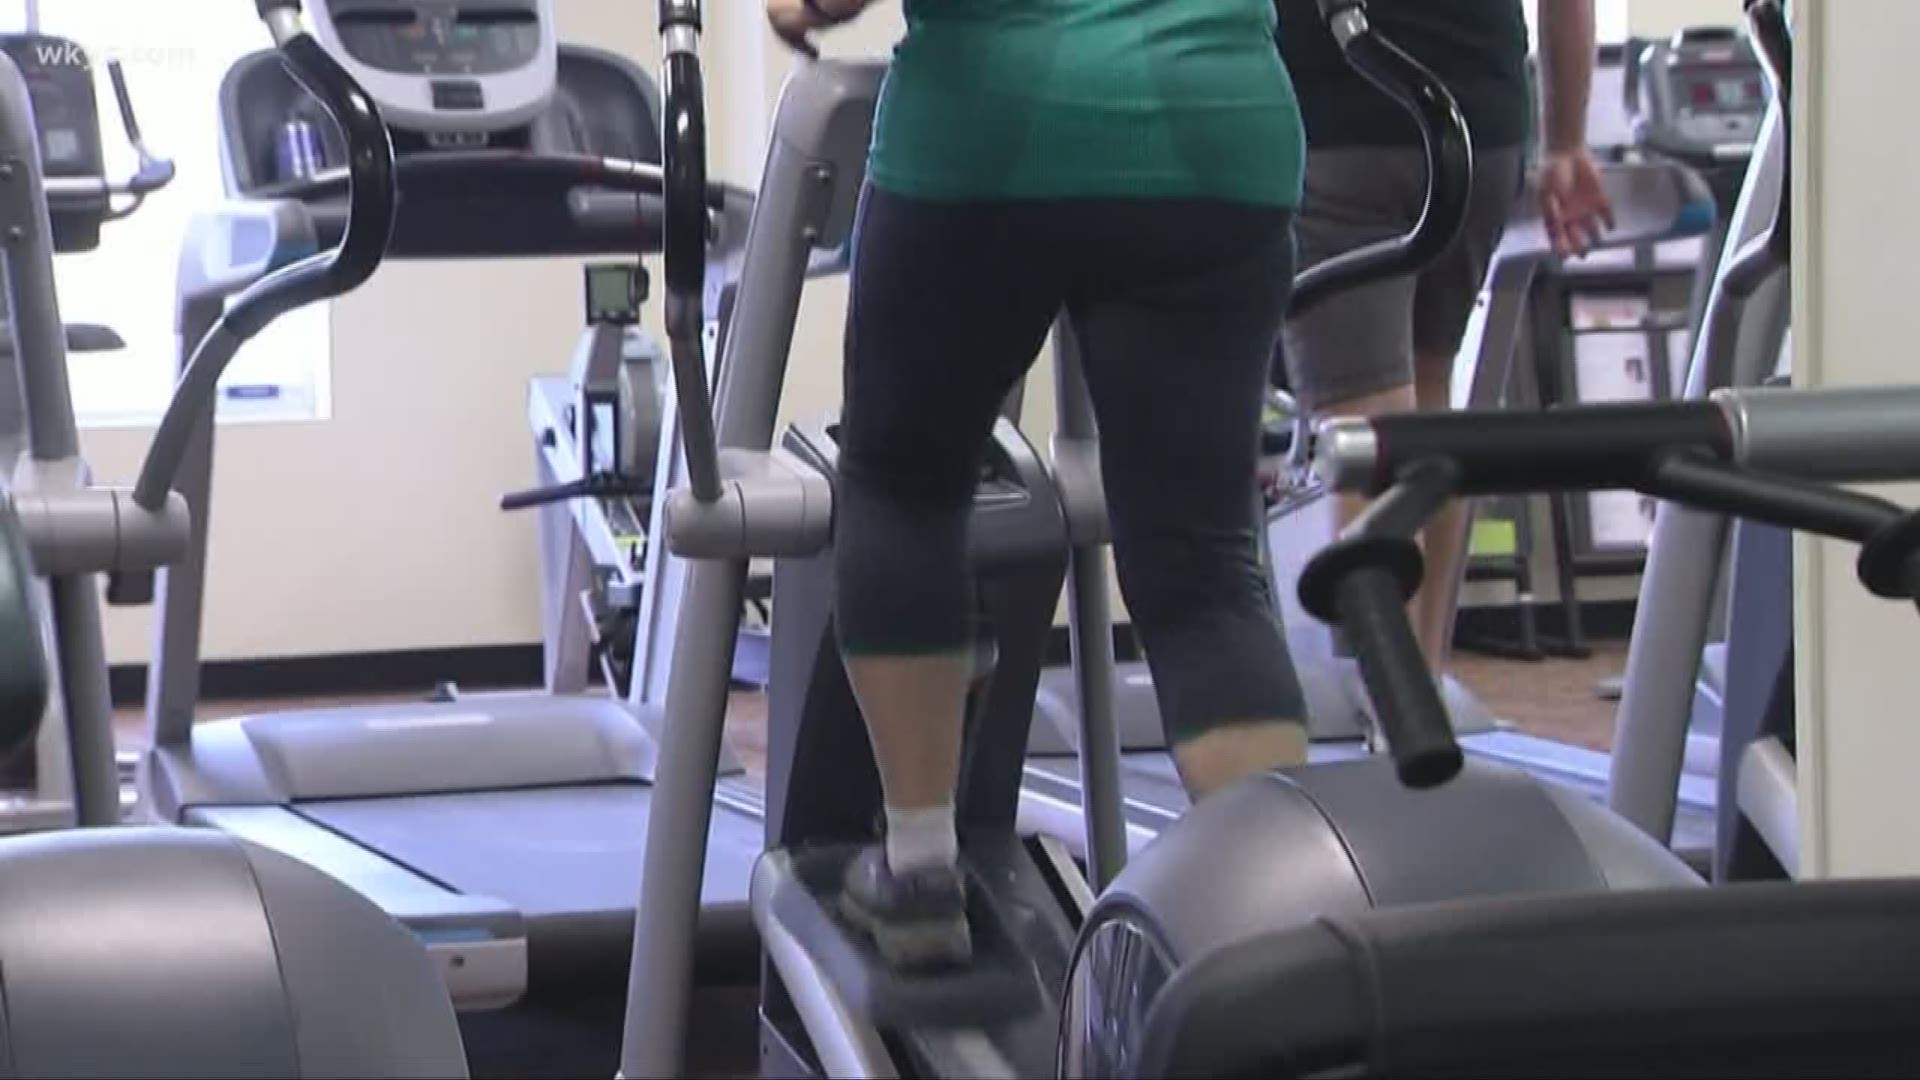 August 2019: A new study suggests that when you work out could impact just how much weight you lose. The article in July's International Journal of Obesity showed that people who showed up to the gym in the morning -- before noon, specifically -- lost more weight than those who exercised later in the day.